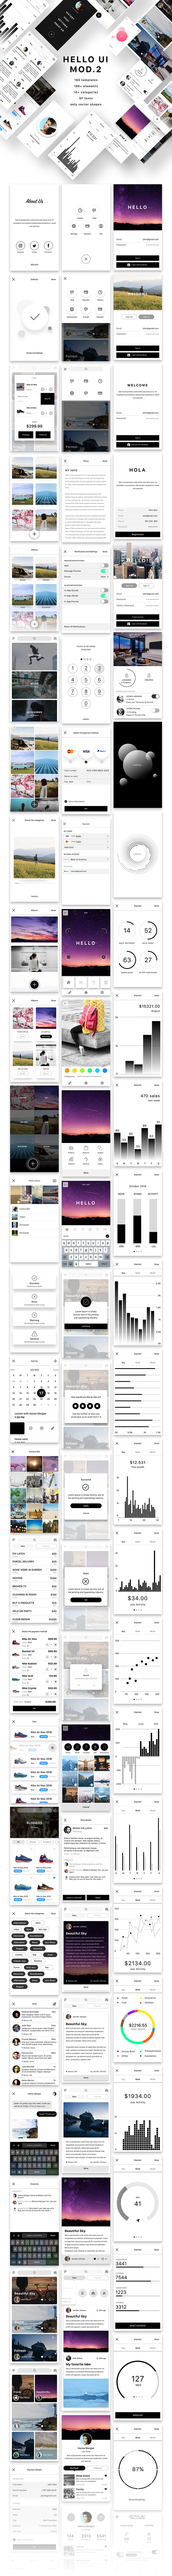 Hello UI Kit Mod. 2 in UI Kits and Libraries - product preview 1